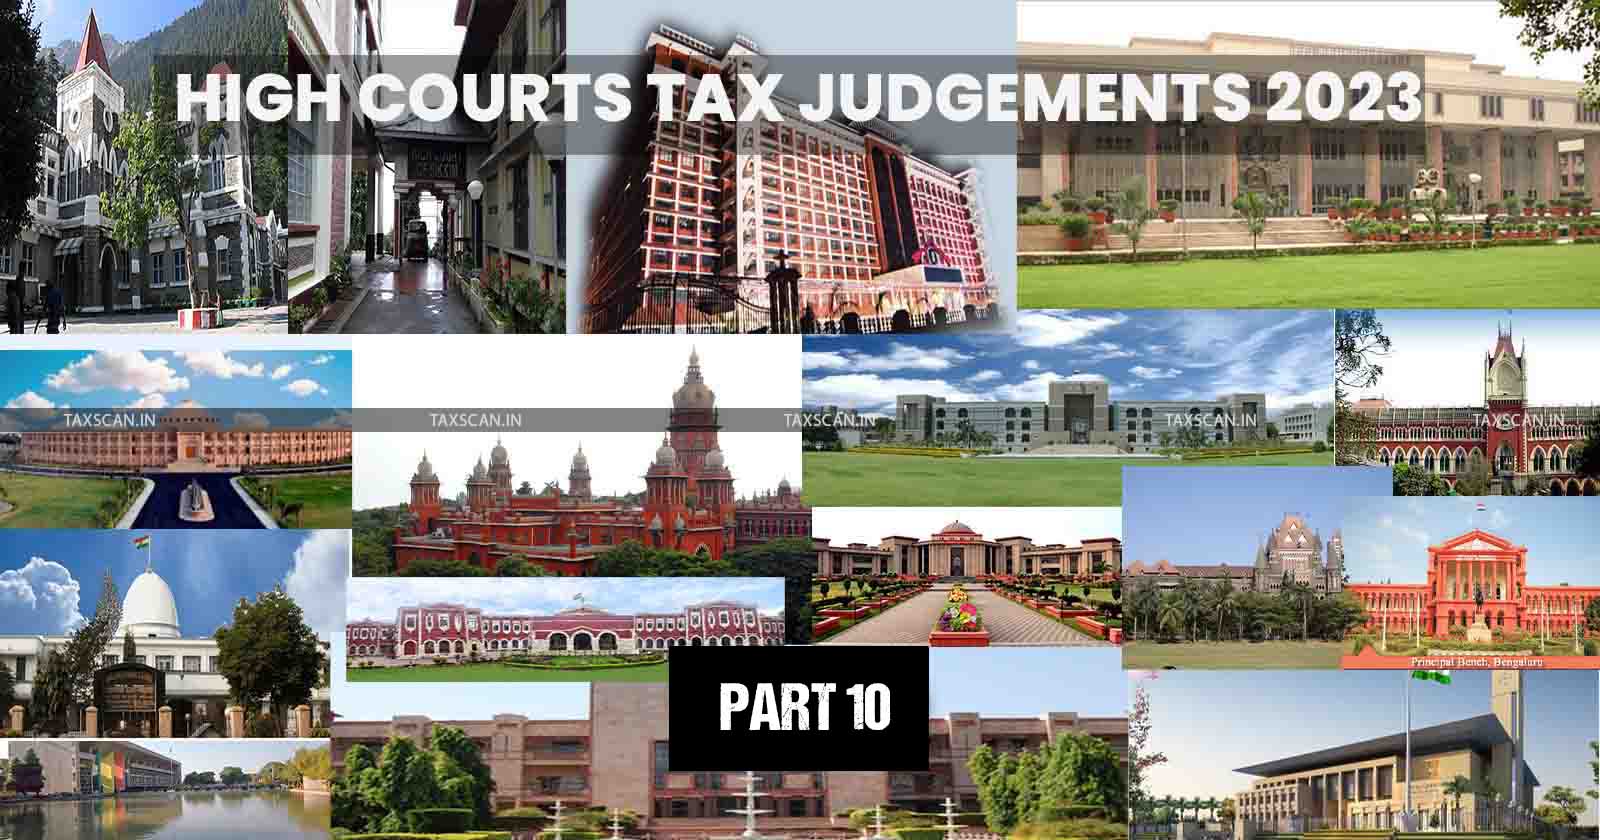 High Courts Annual Digest - Tax Judgment of High Courts - hc - high courts - Annual Digest - Digest - TAXSCAN